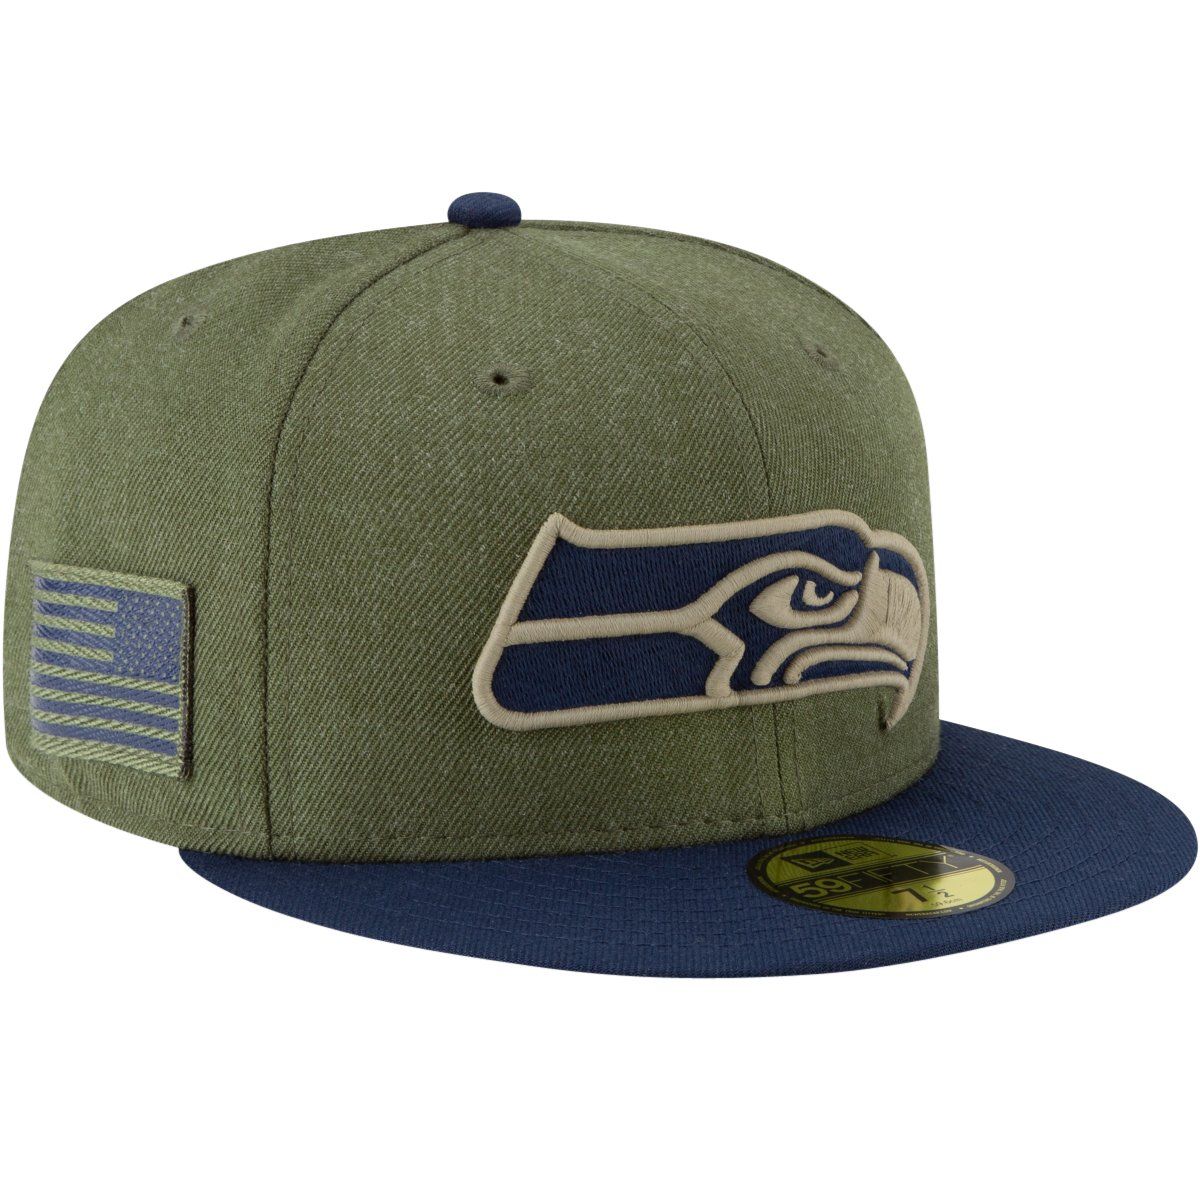 New Era 59Fifty Cap - Salute to Service Seattle Seahawks